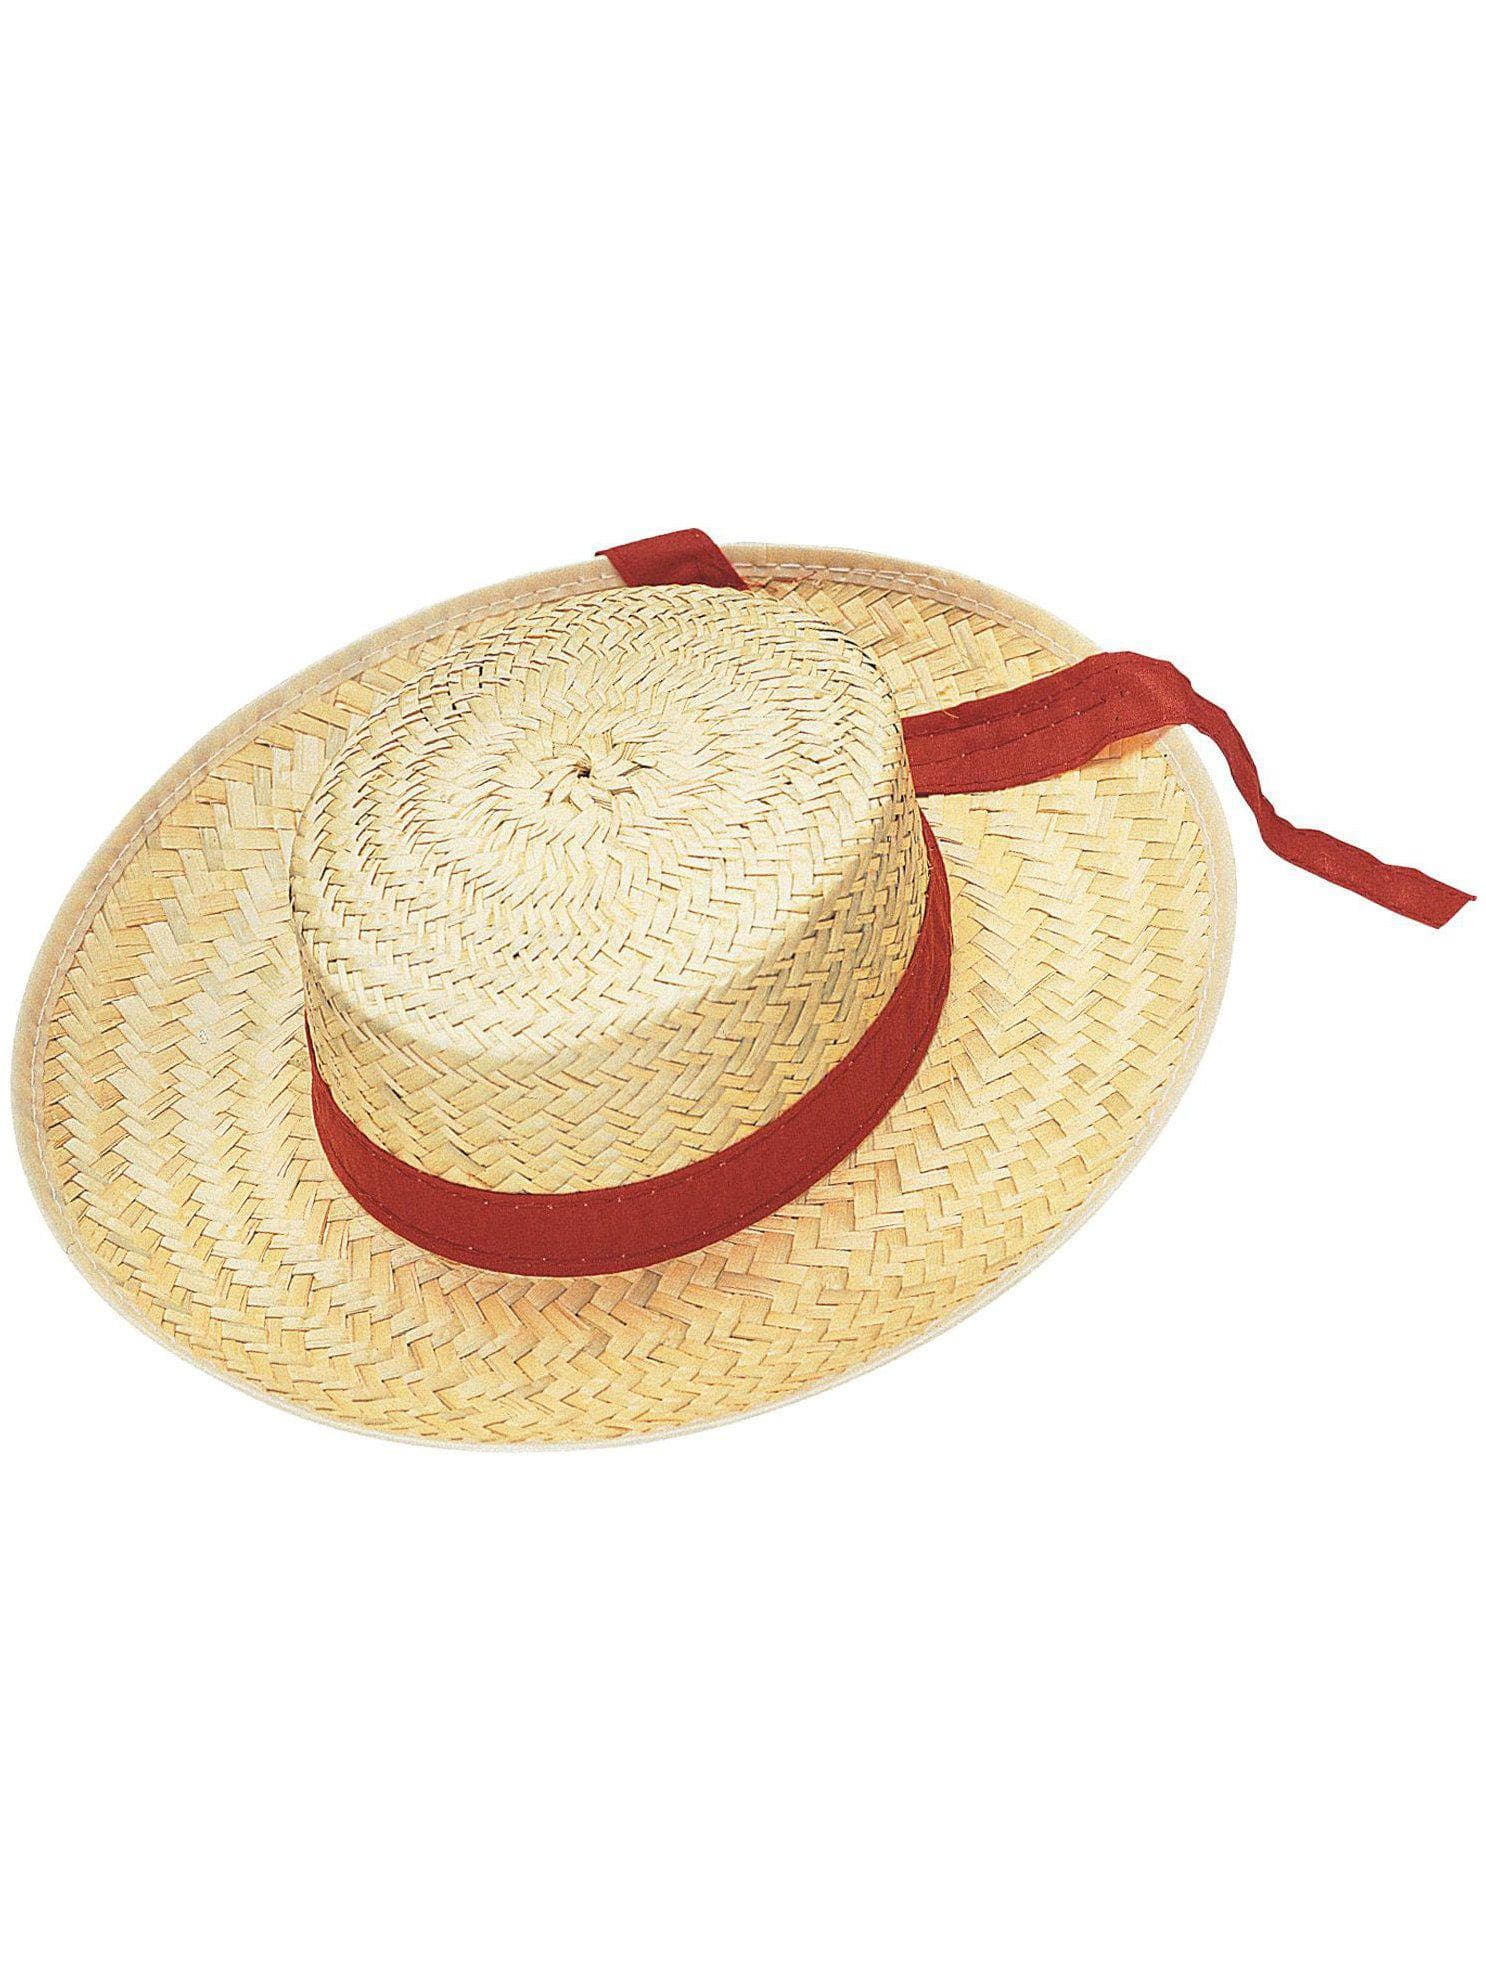 Adult Straw Gondolier Hat with Red Trim - costumes.com